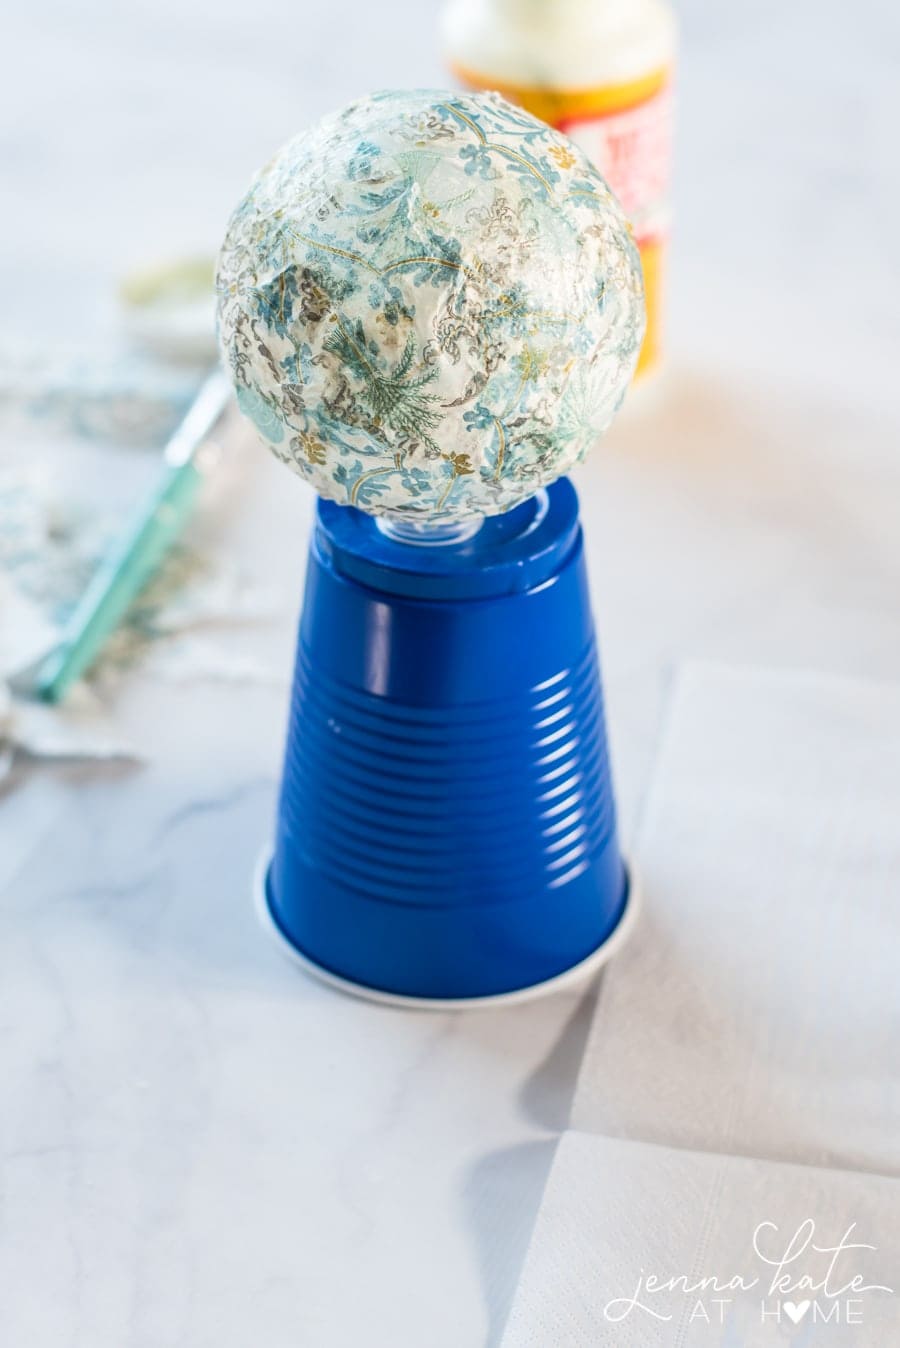 Resting the ornament on a blue plastic cup to let it dry; a paint brush and Mod Podge bottle in the background